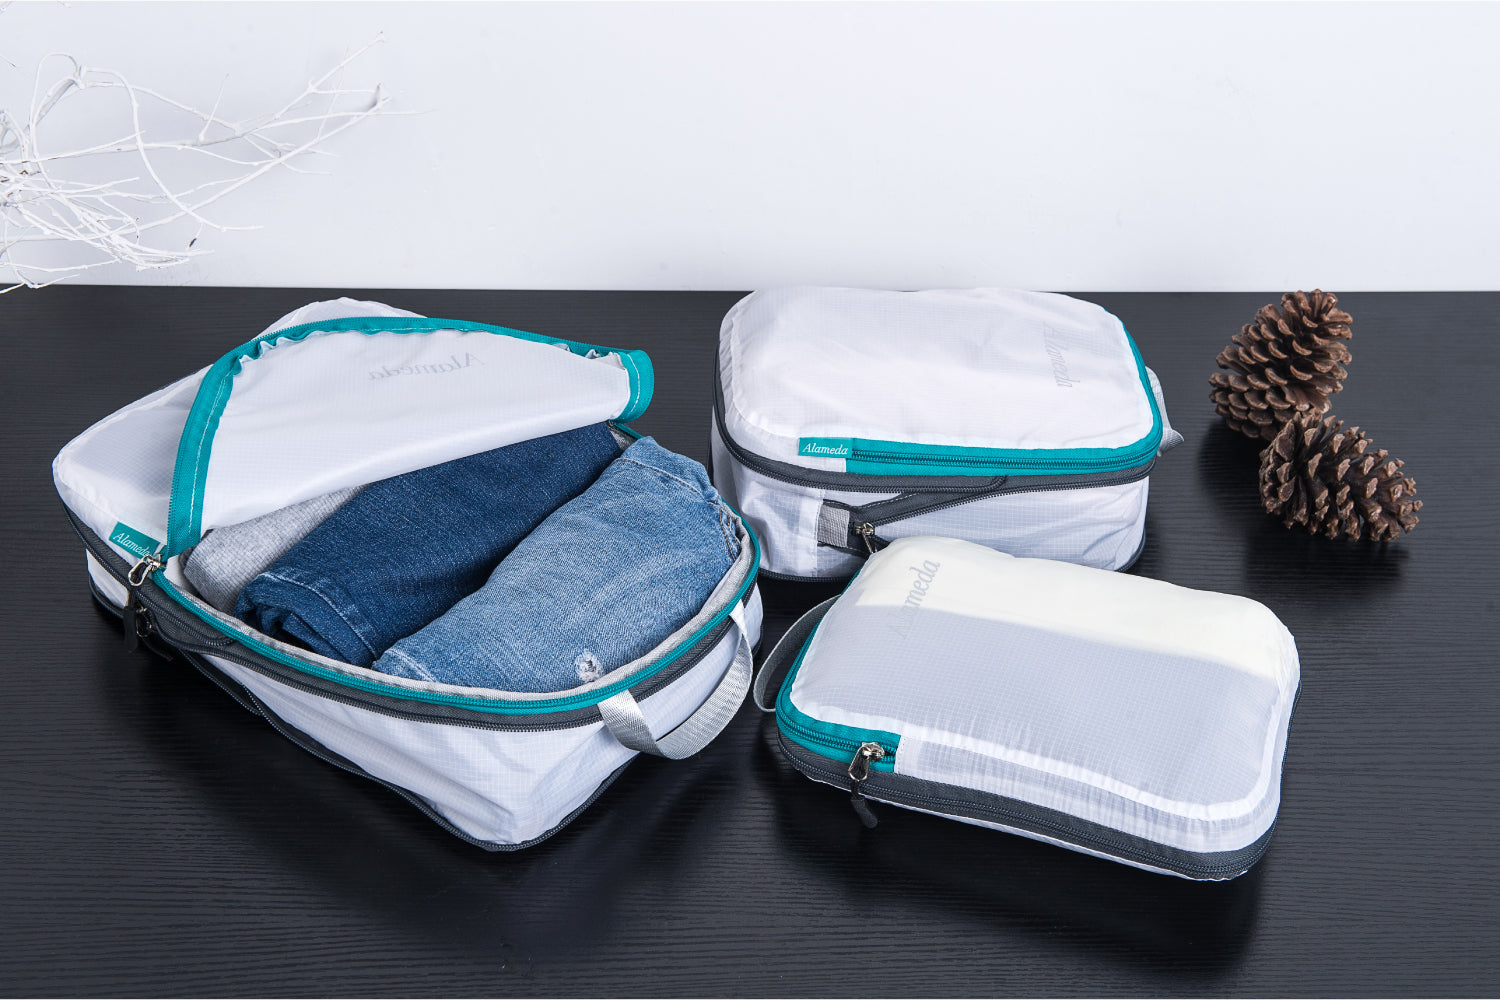 Maximise Suitcase Space with Compression Packing Cubes - Shop Now!